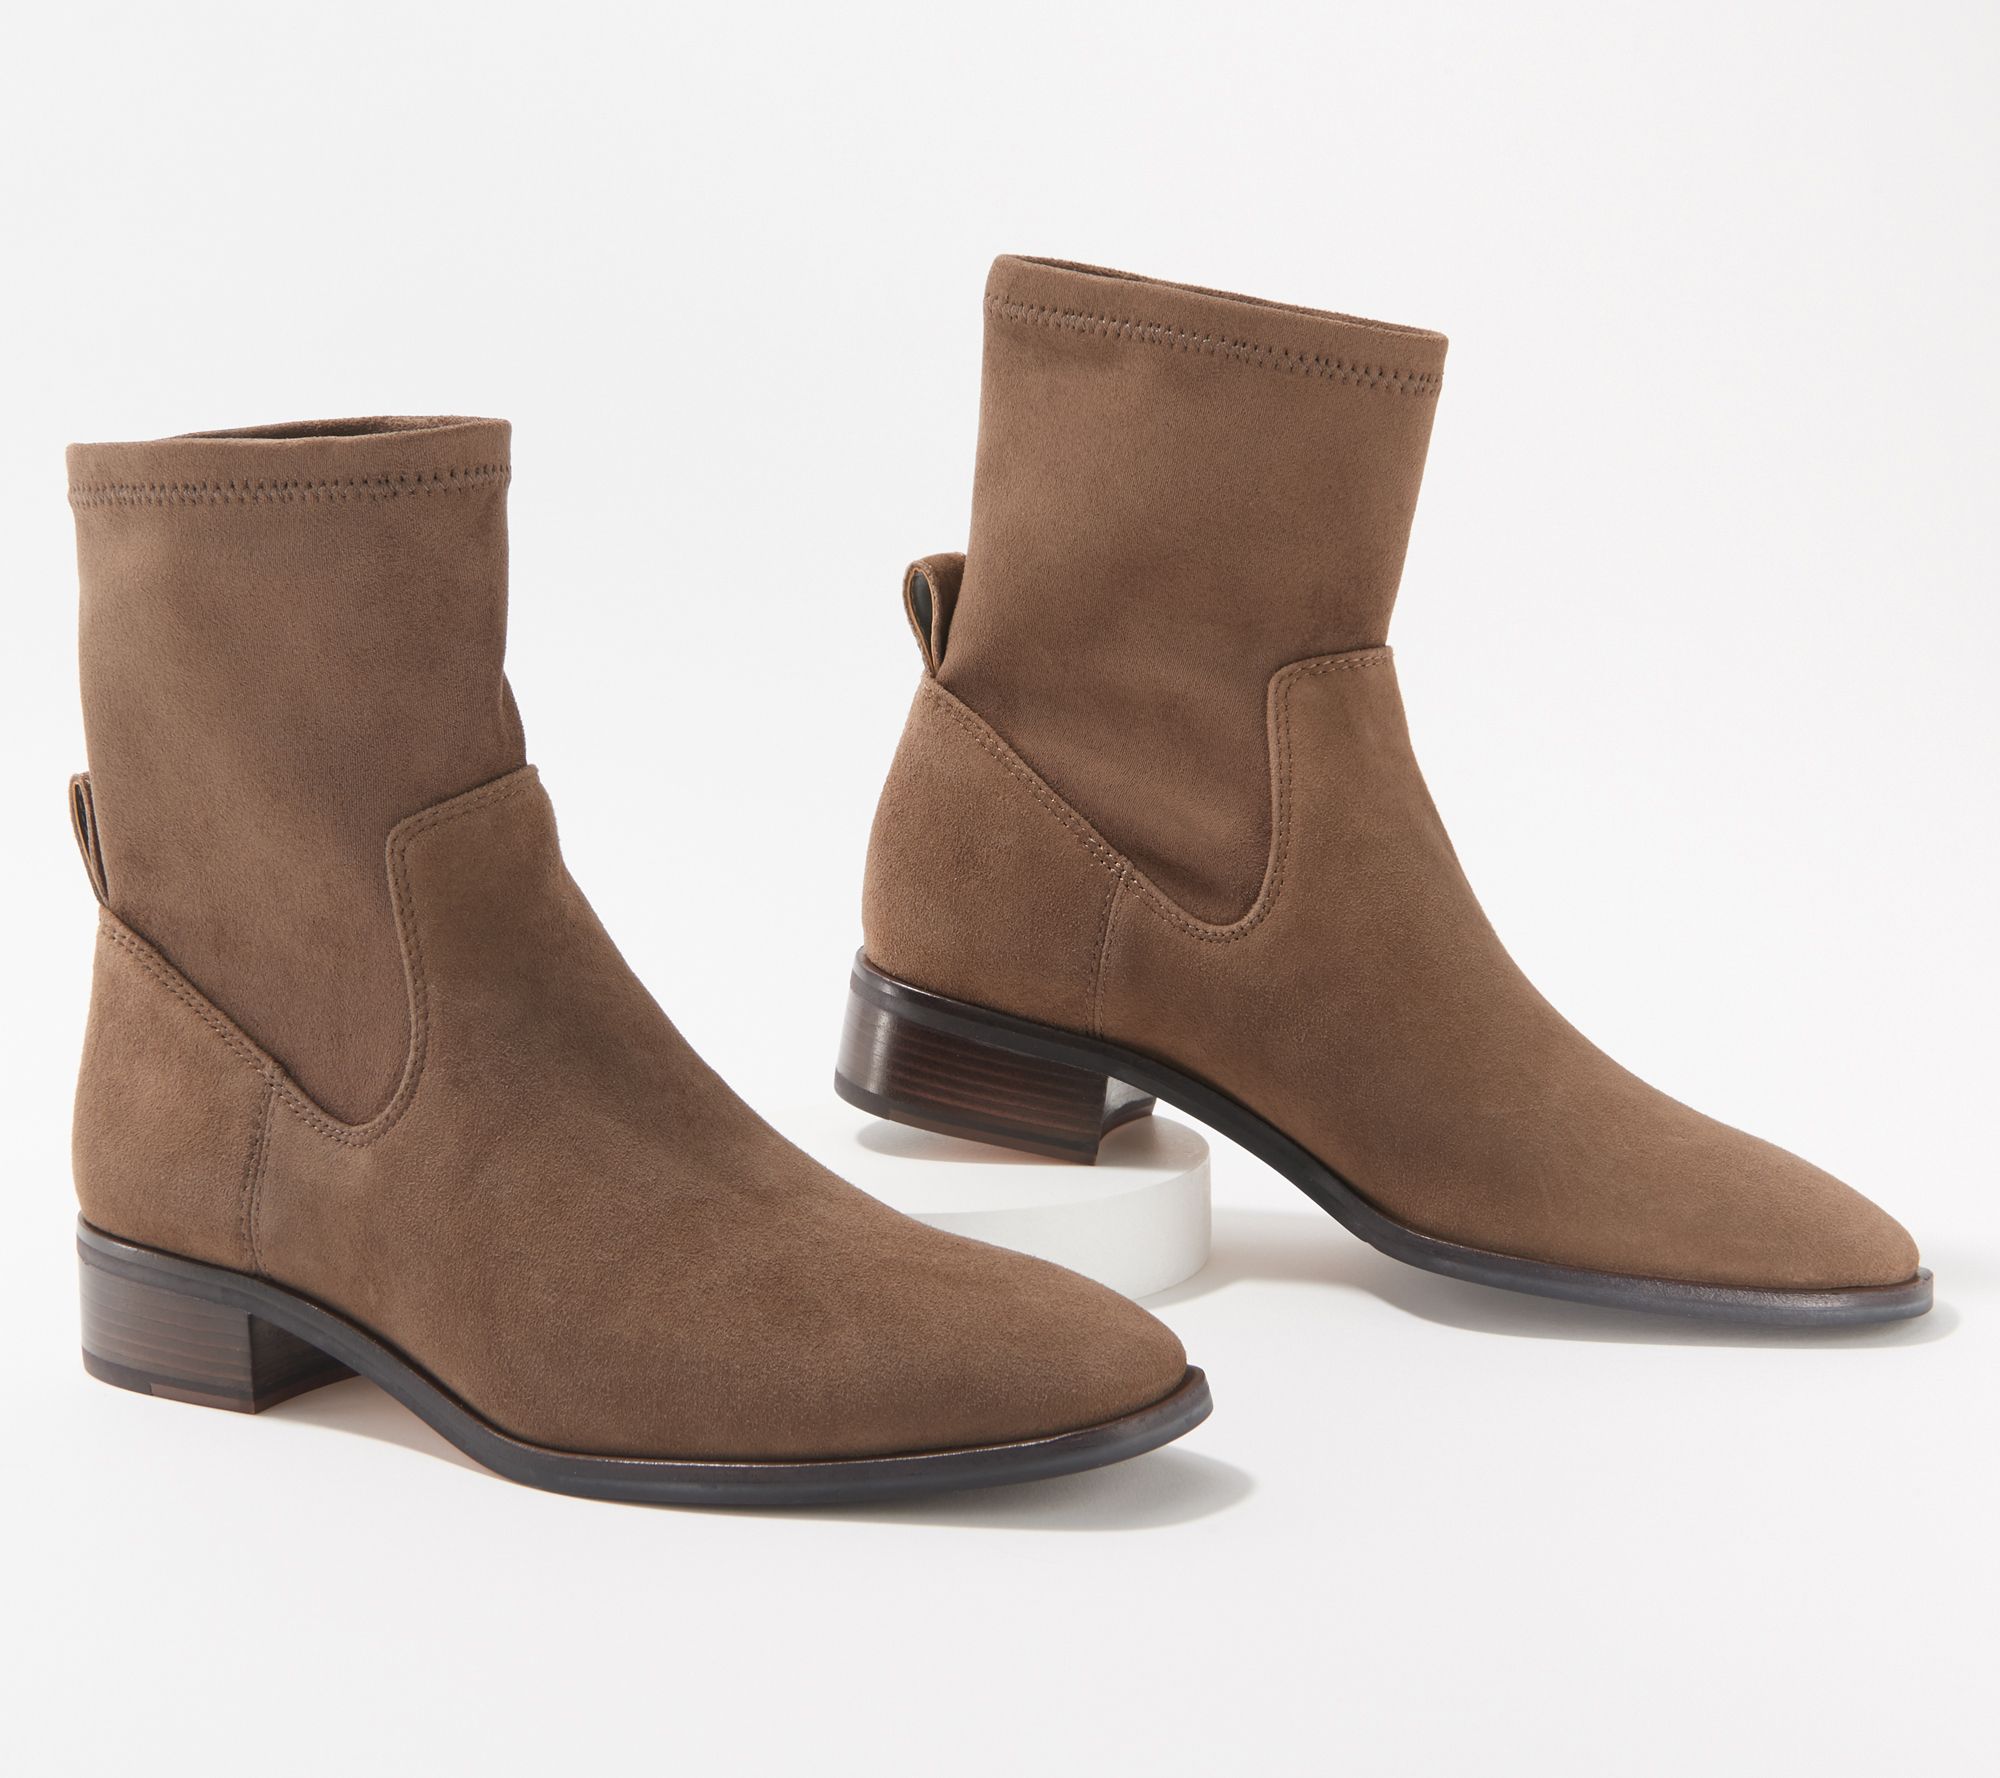 Louise et Cie Stretch Ankle Boots Silko Granola